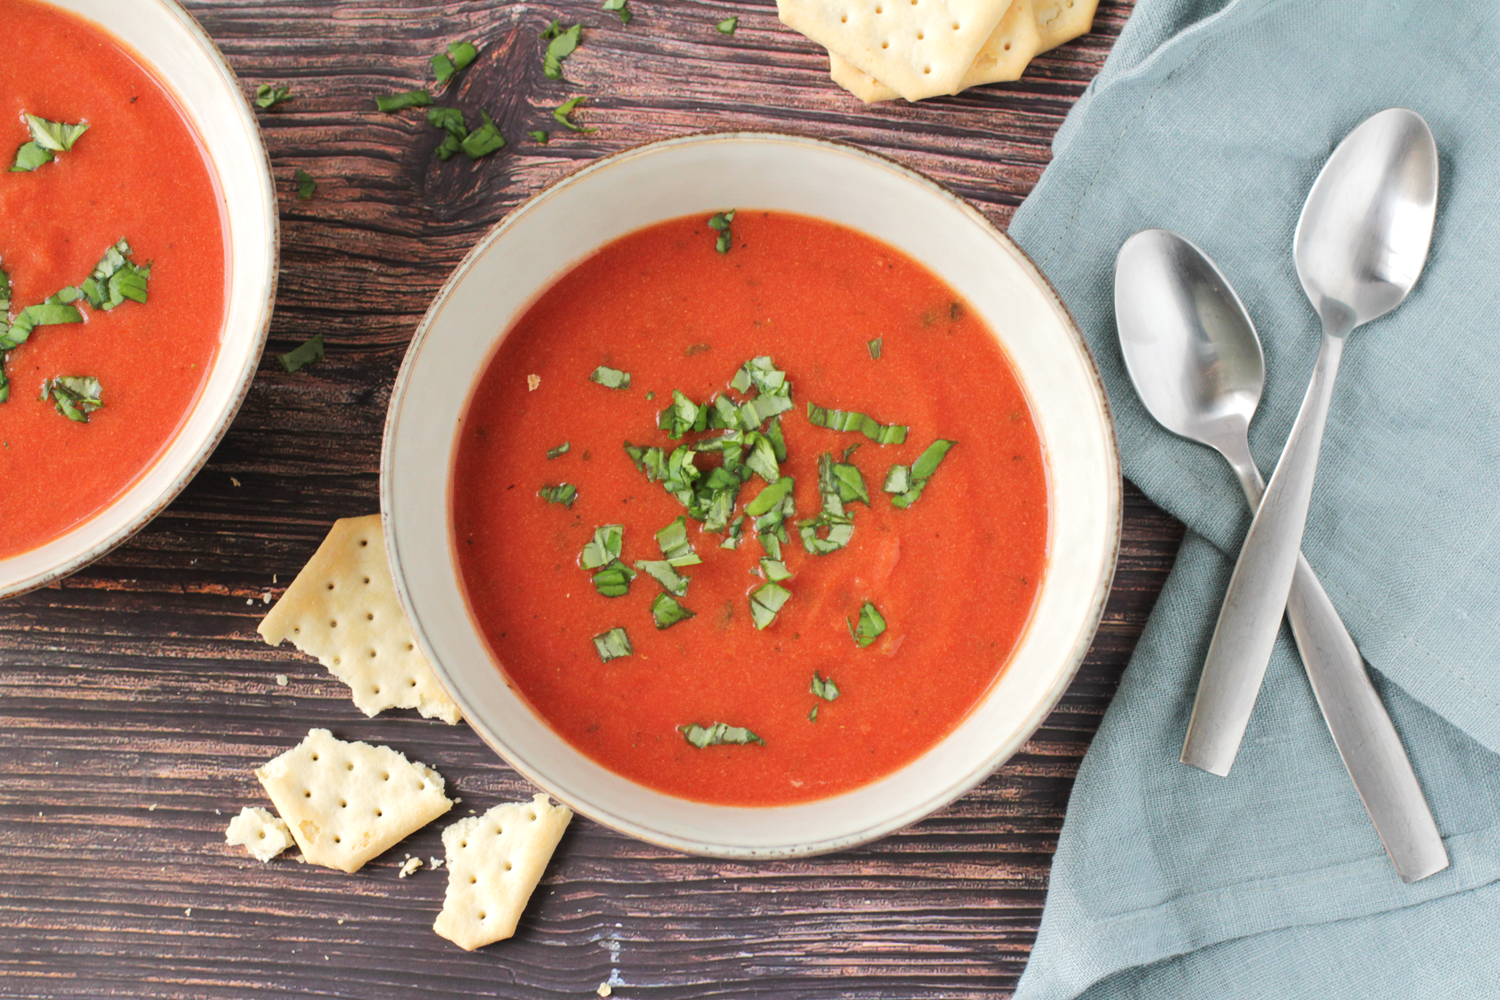 Low FODMAP Creamy Tomato Soup - Delicious as it Looks